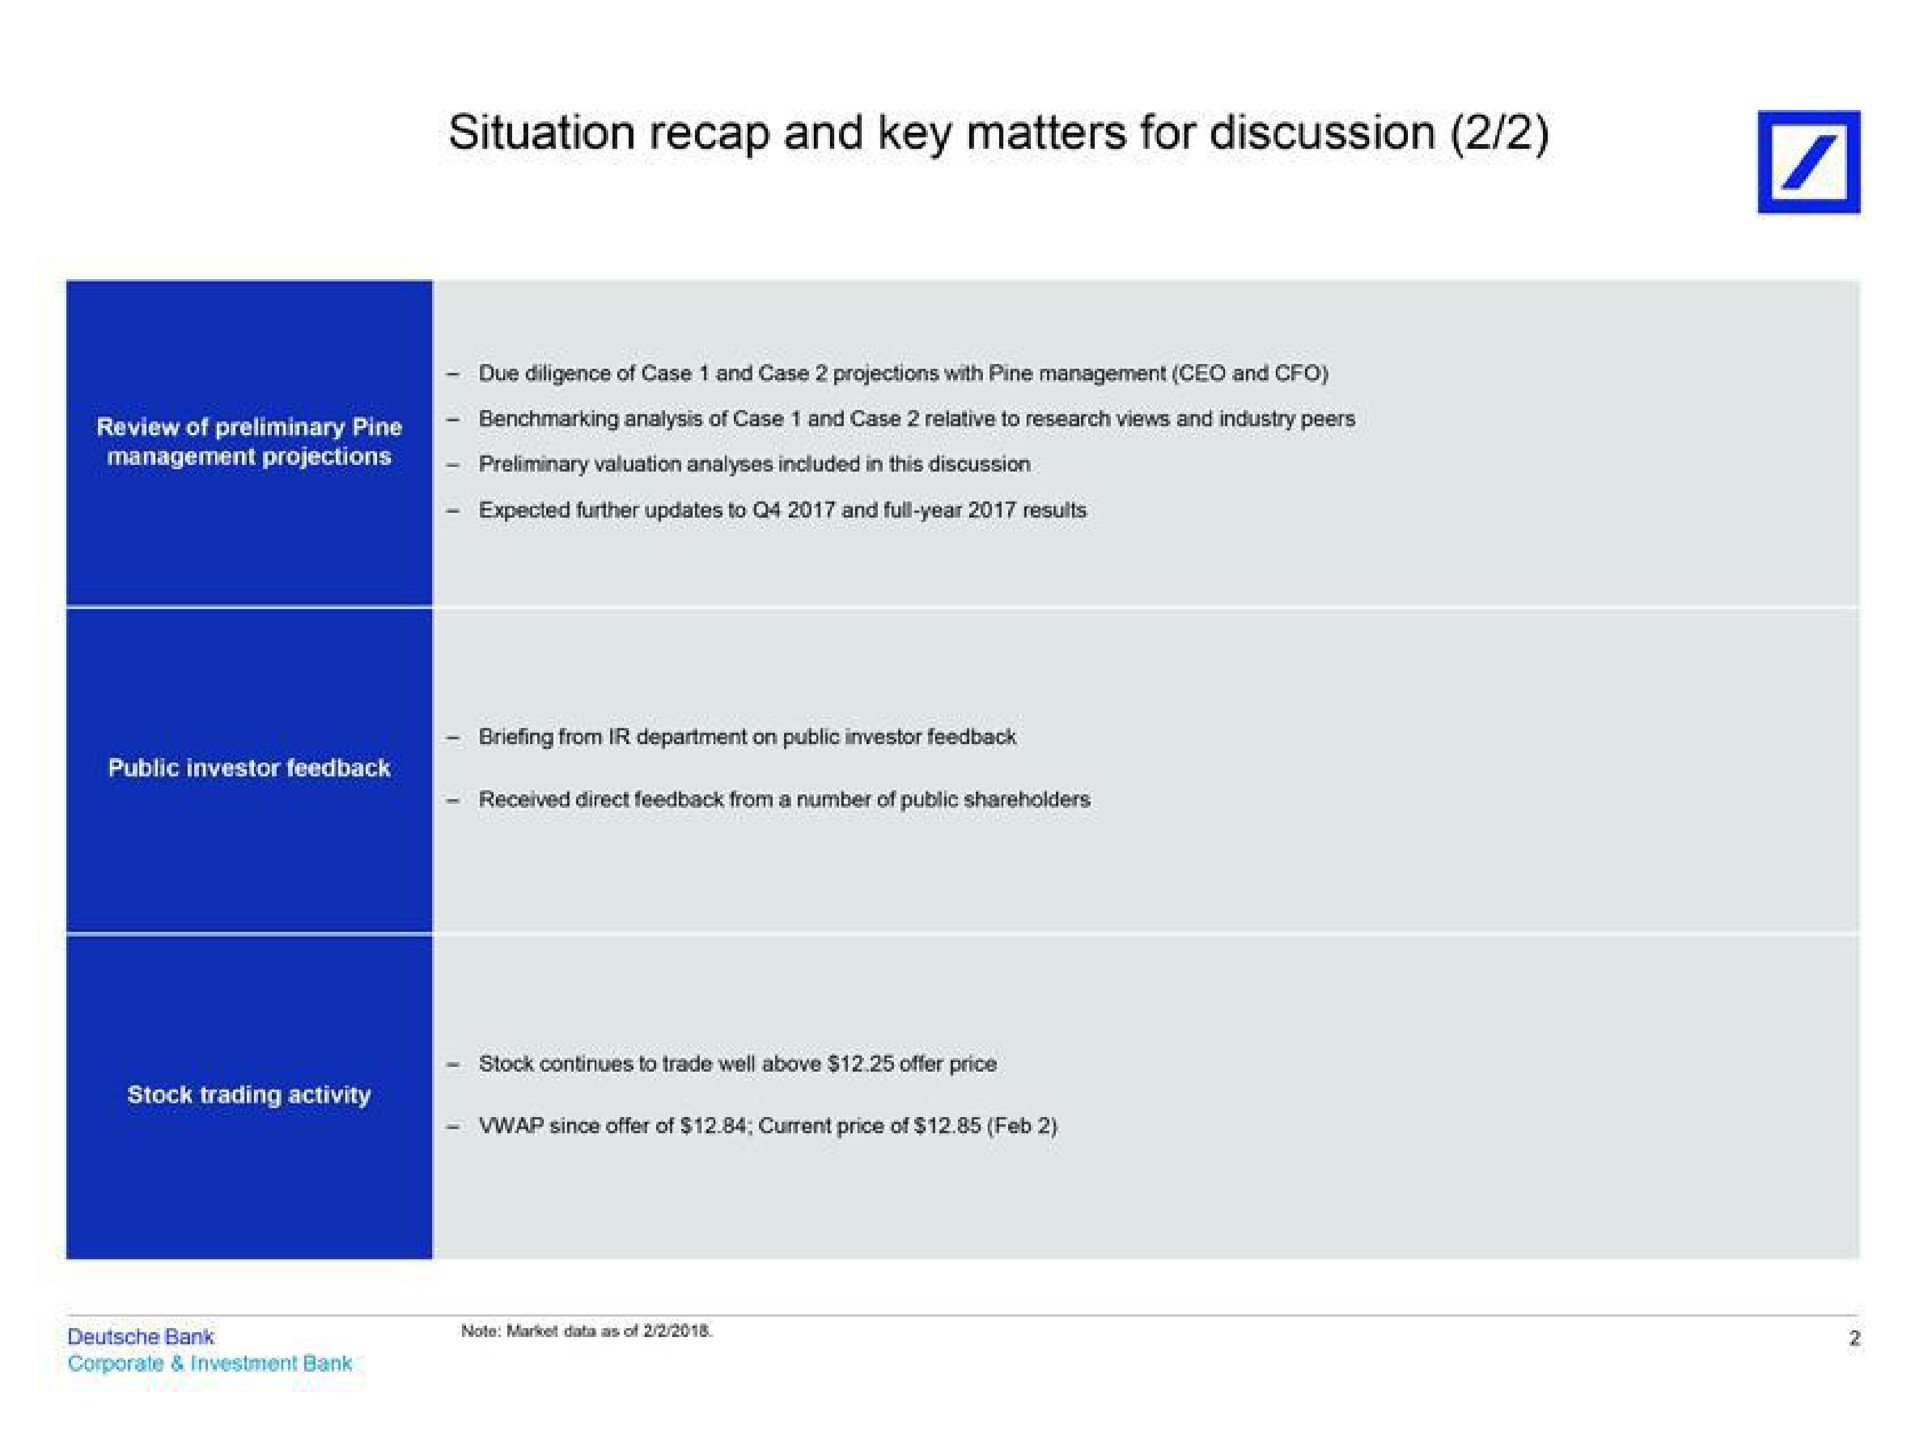 situation recap and key matters for discussion | Deutsche Bank